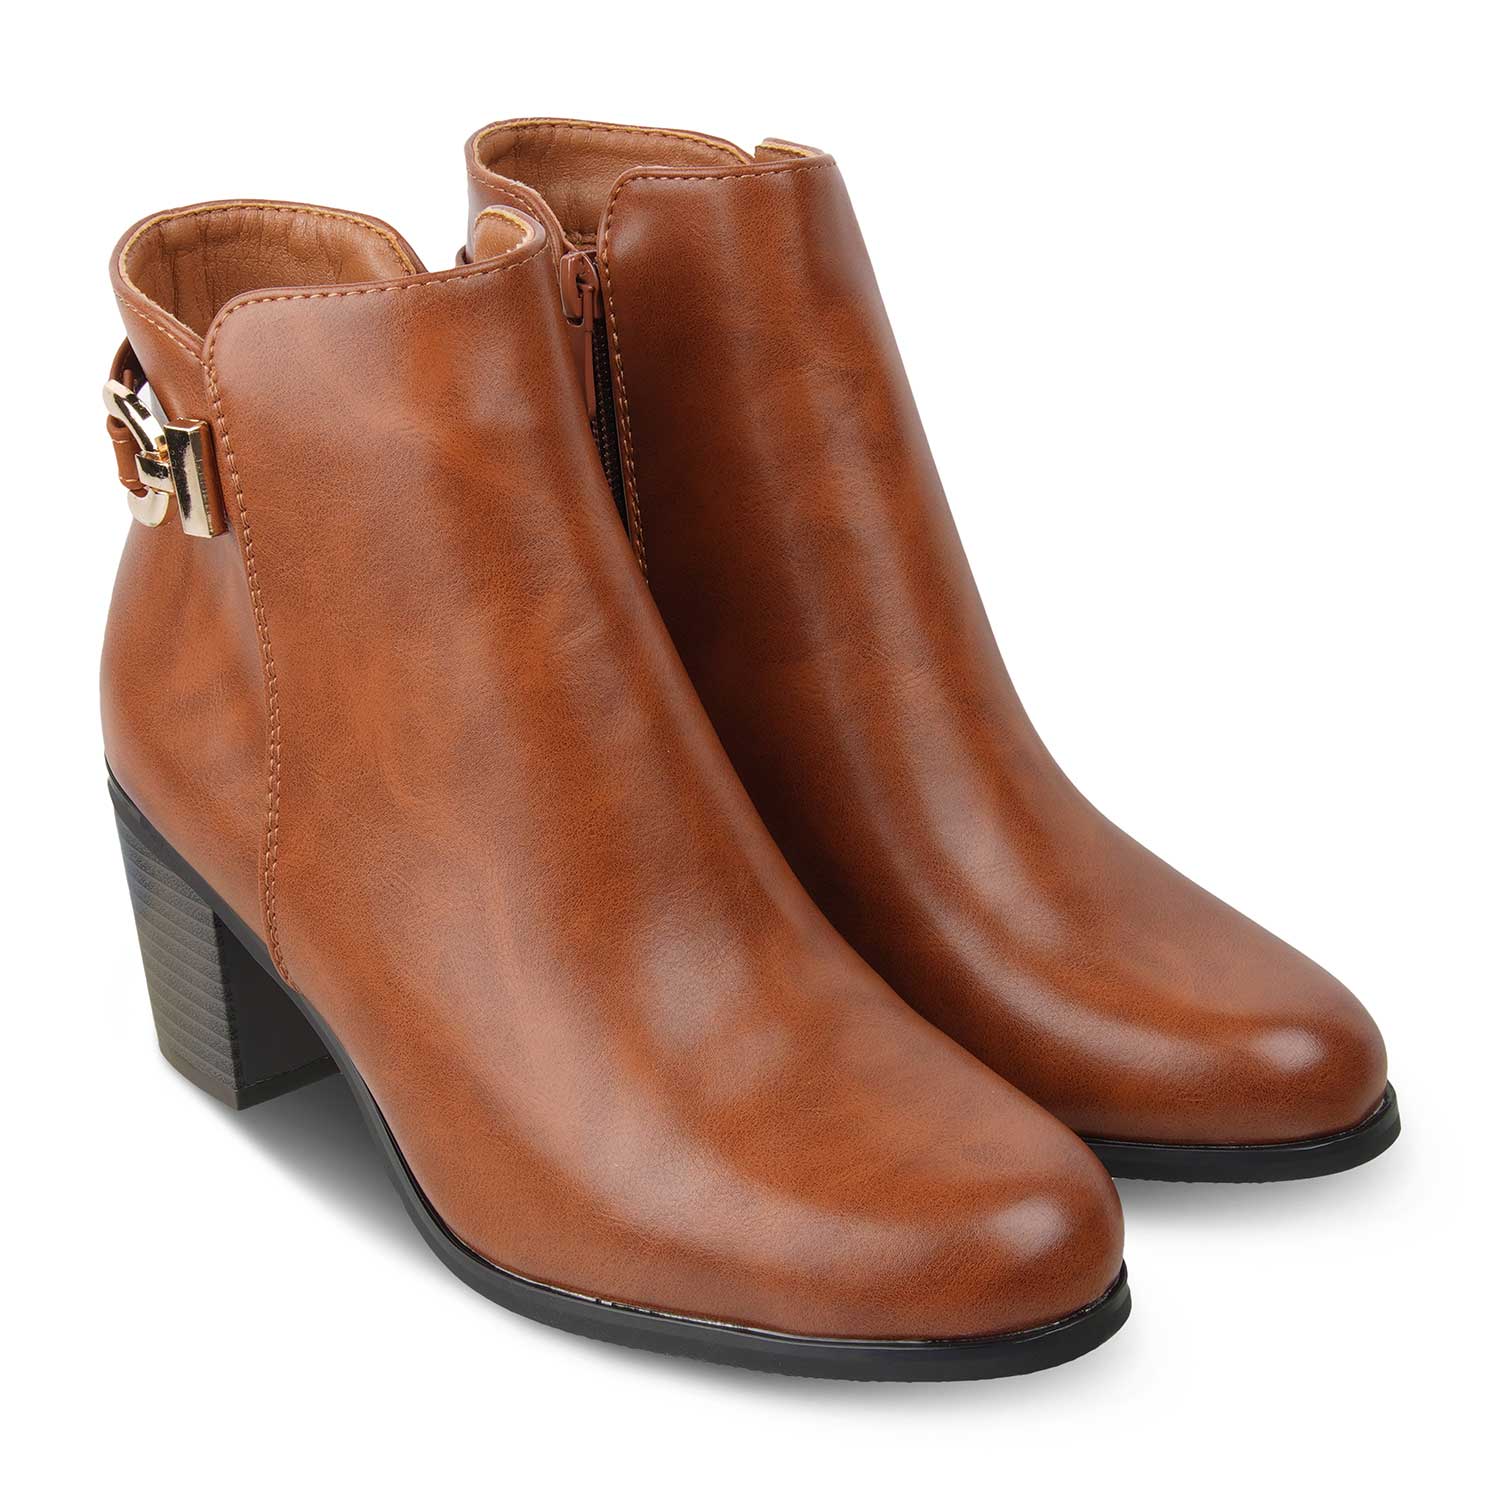 The Bronzo Camel Women's Ankle-length Boots Tresmode